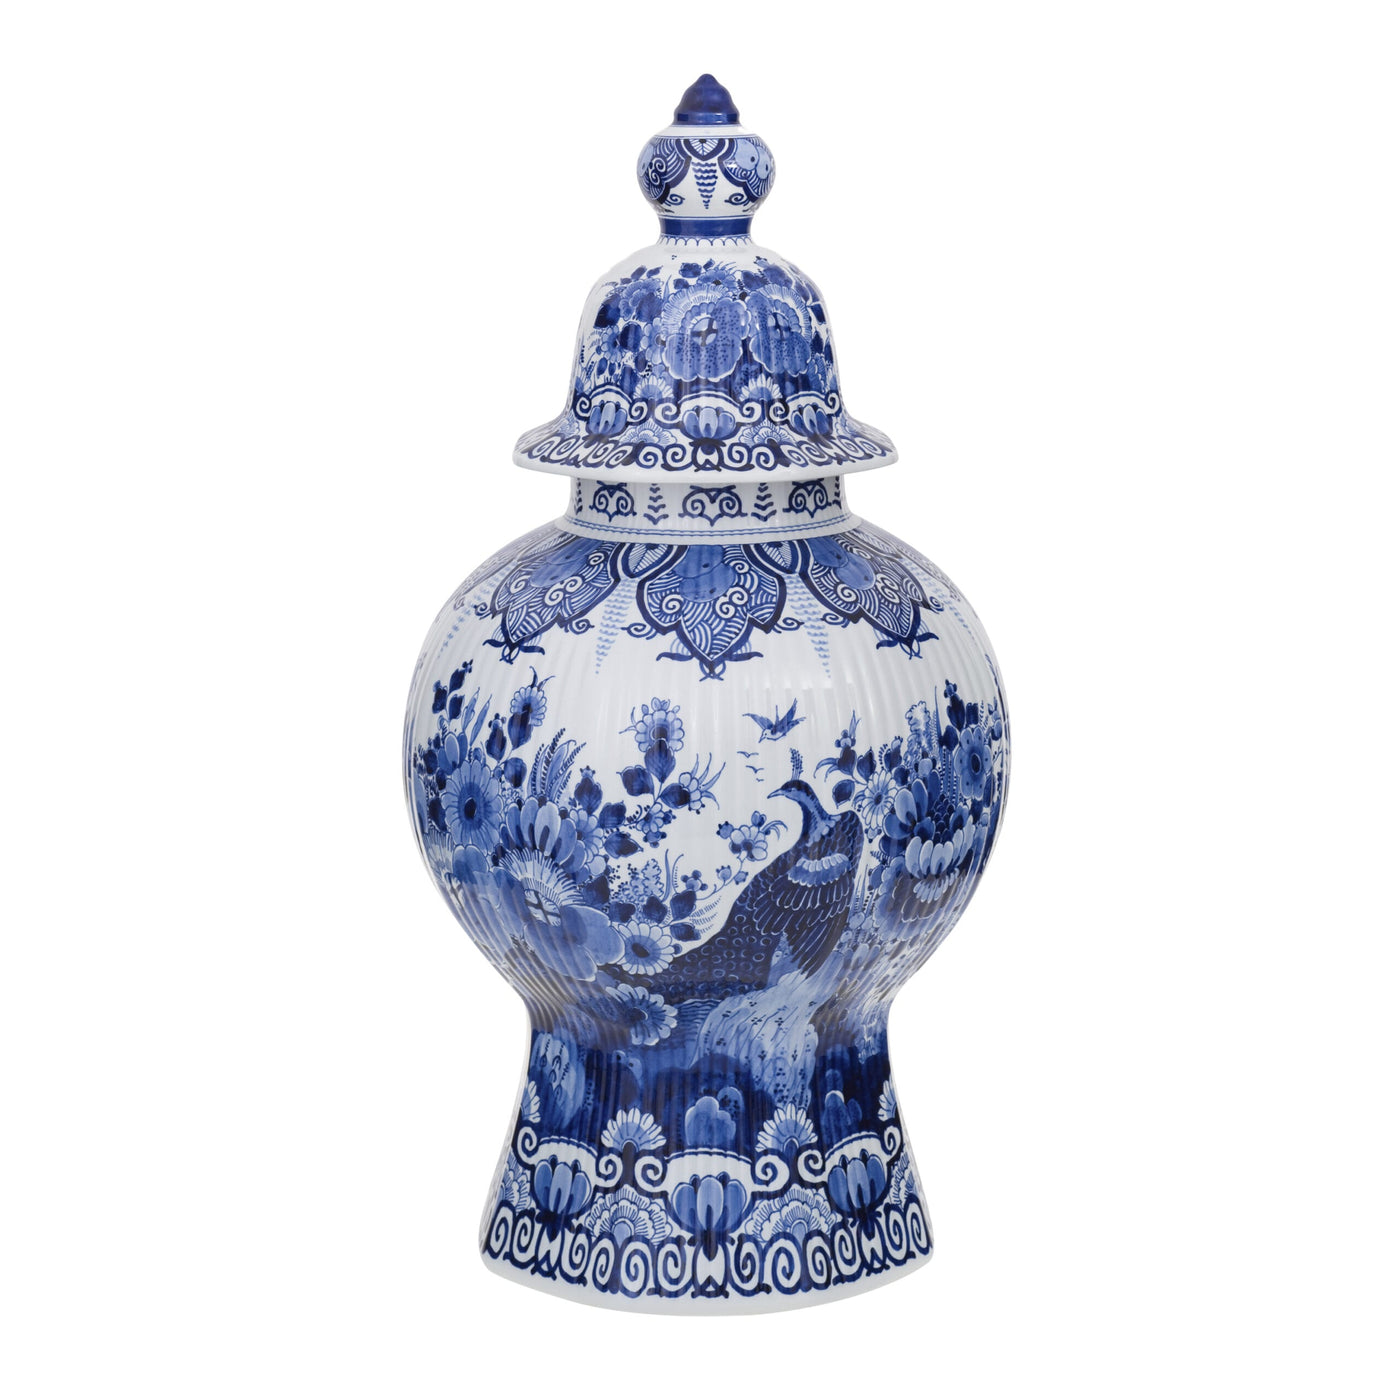 Peacock Jar with Lid Hand-Painted by Royal Delft